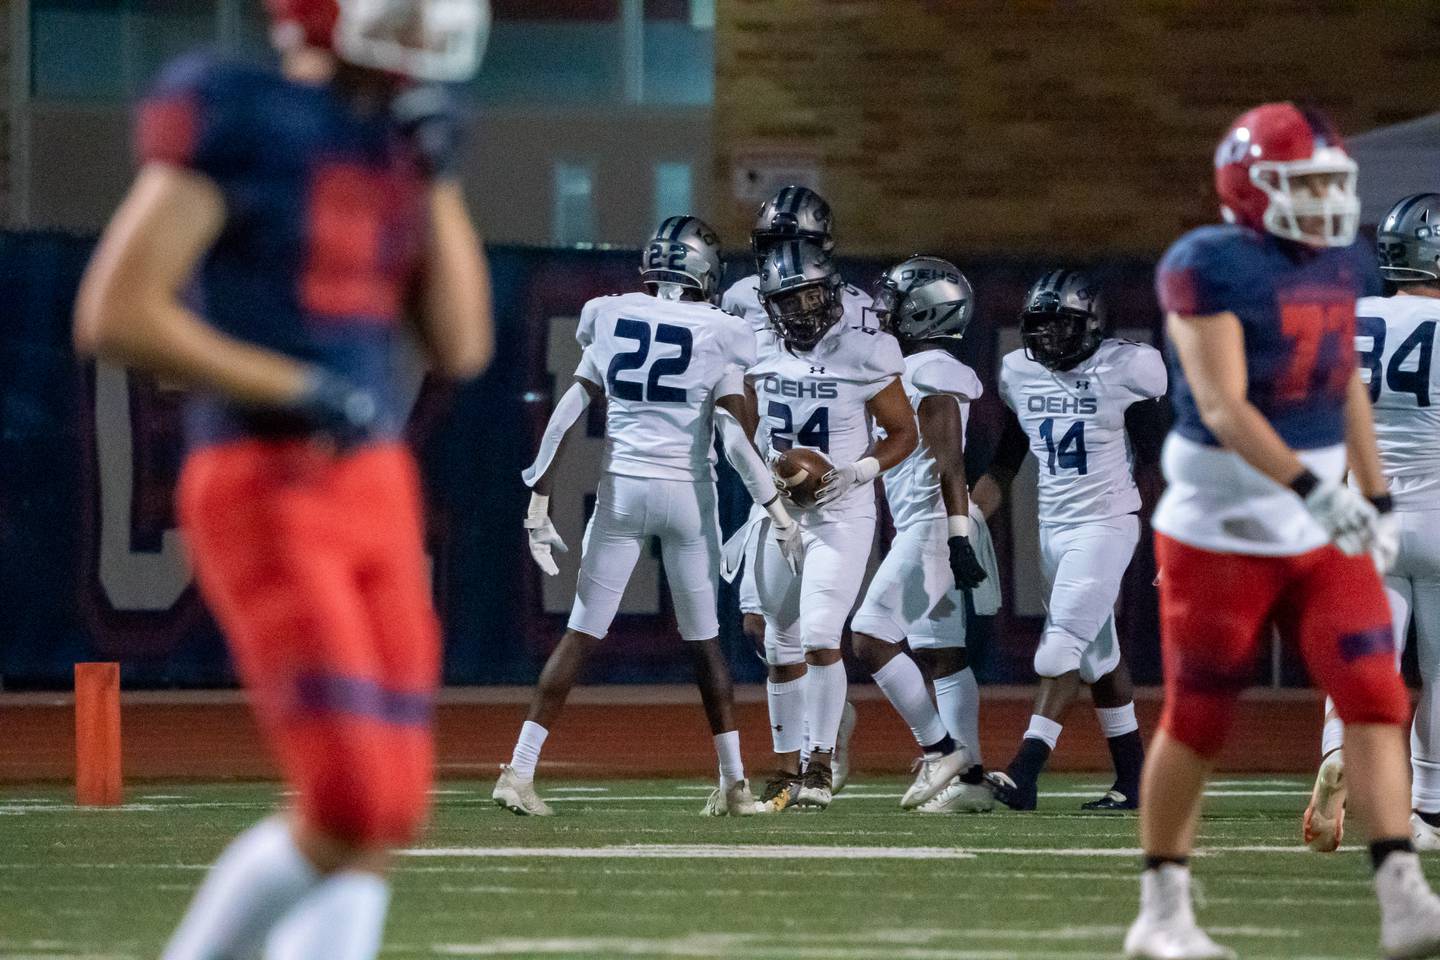 Oswego East's Juny Almeida (24) is met by his team after scoring on a fumble recovery against West Aurora during a high school football game at West Aurora High School in Aurora on Friday, Sep 24, 2021.